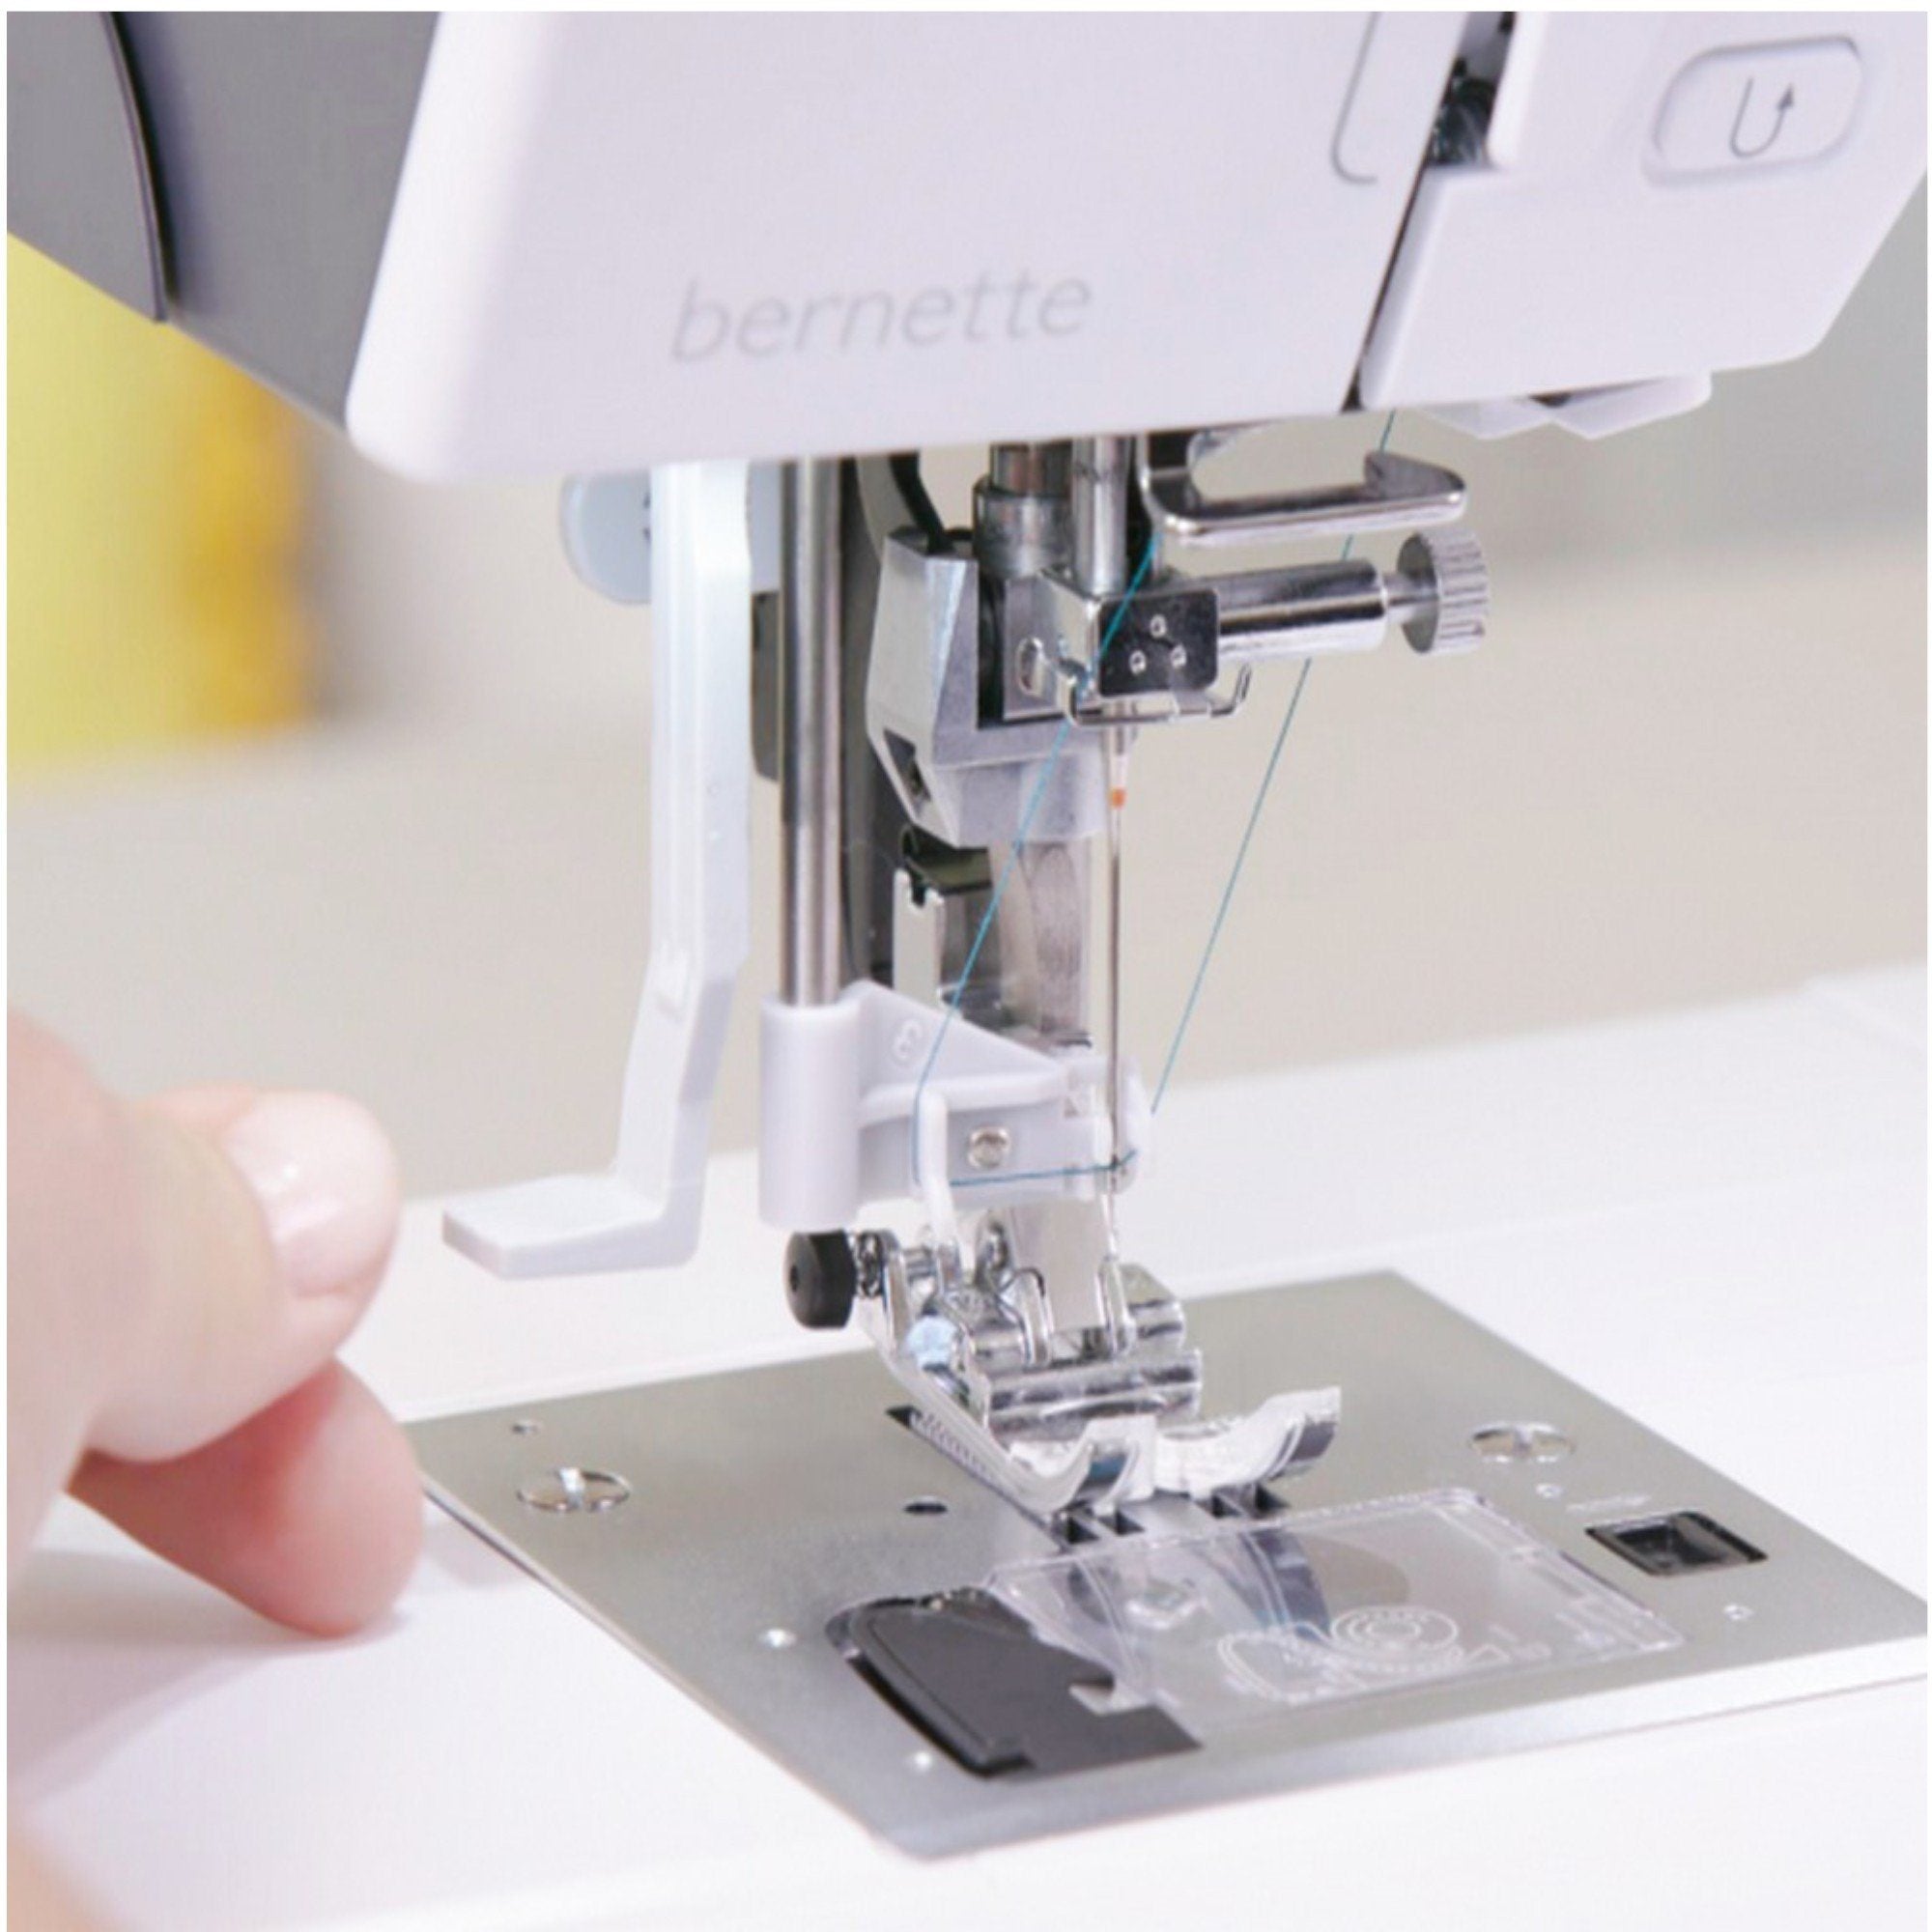 Bernette B79 Sewing & Embroidery Machine with Silhouette Cameo 4 Combo Bundle, Size: 500 in